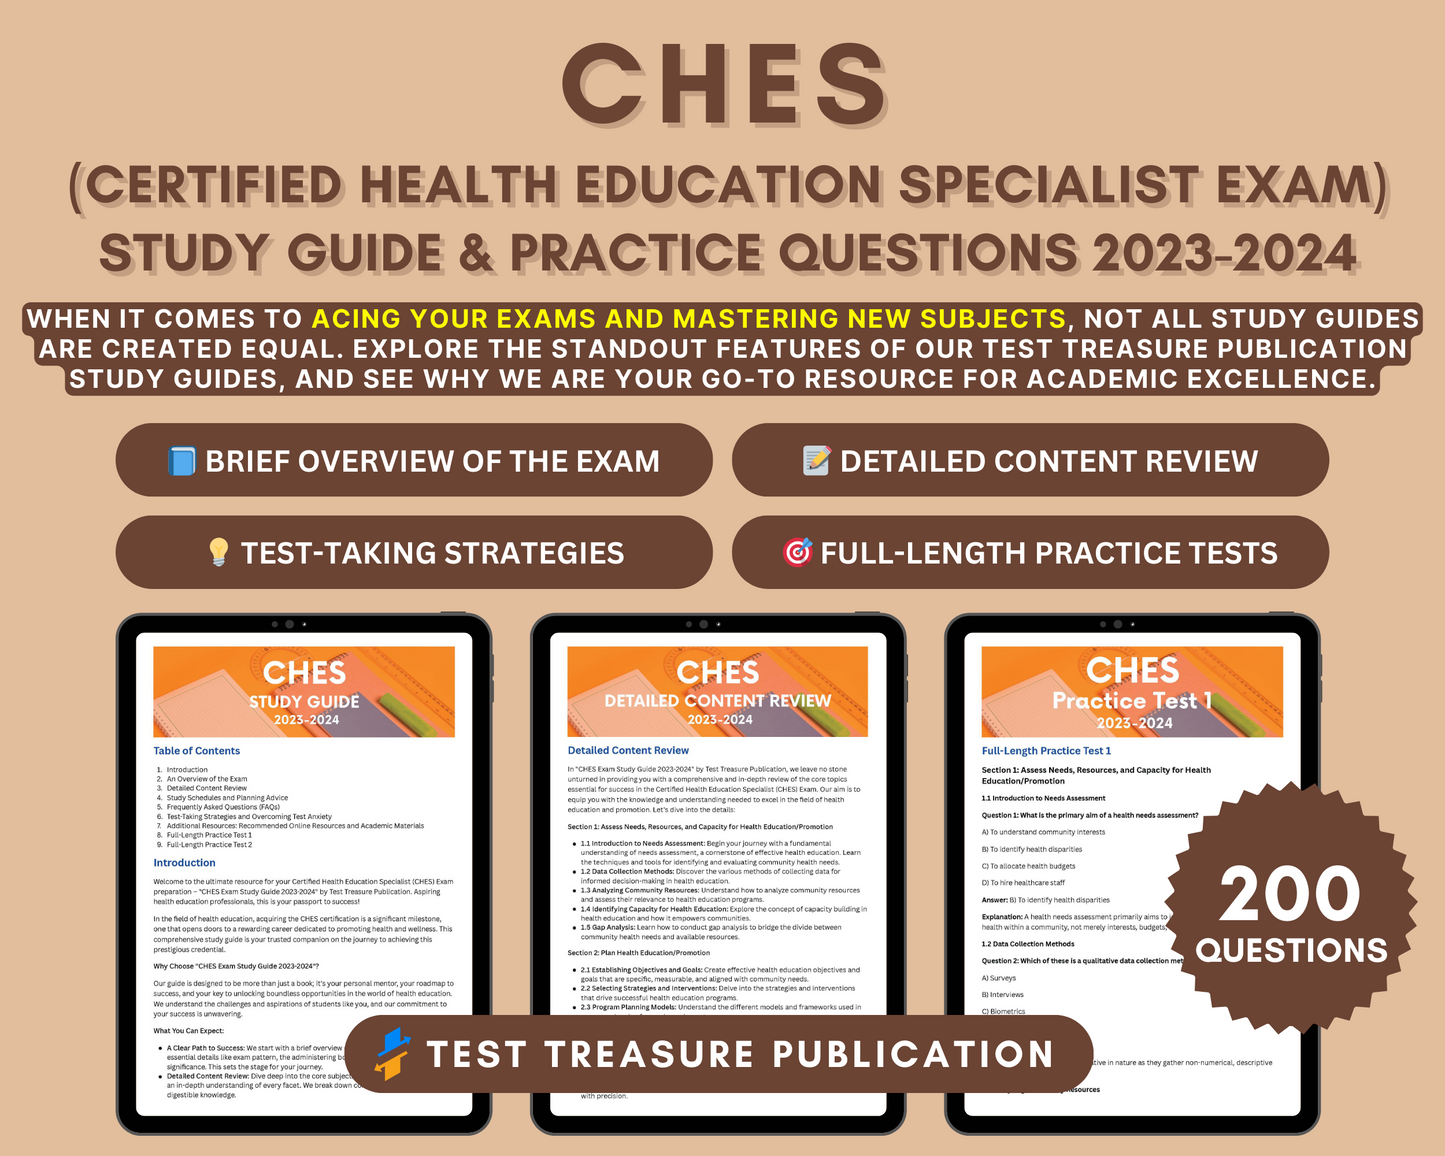 CHES Exam Study Guide 2023-2024: In-Depth Content Review, and Practice Tests for Certified Health Education Specialist